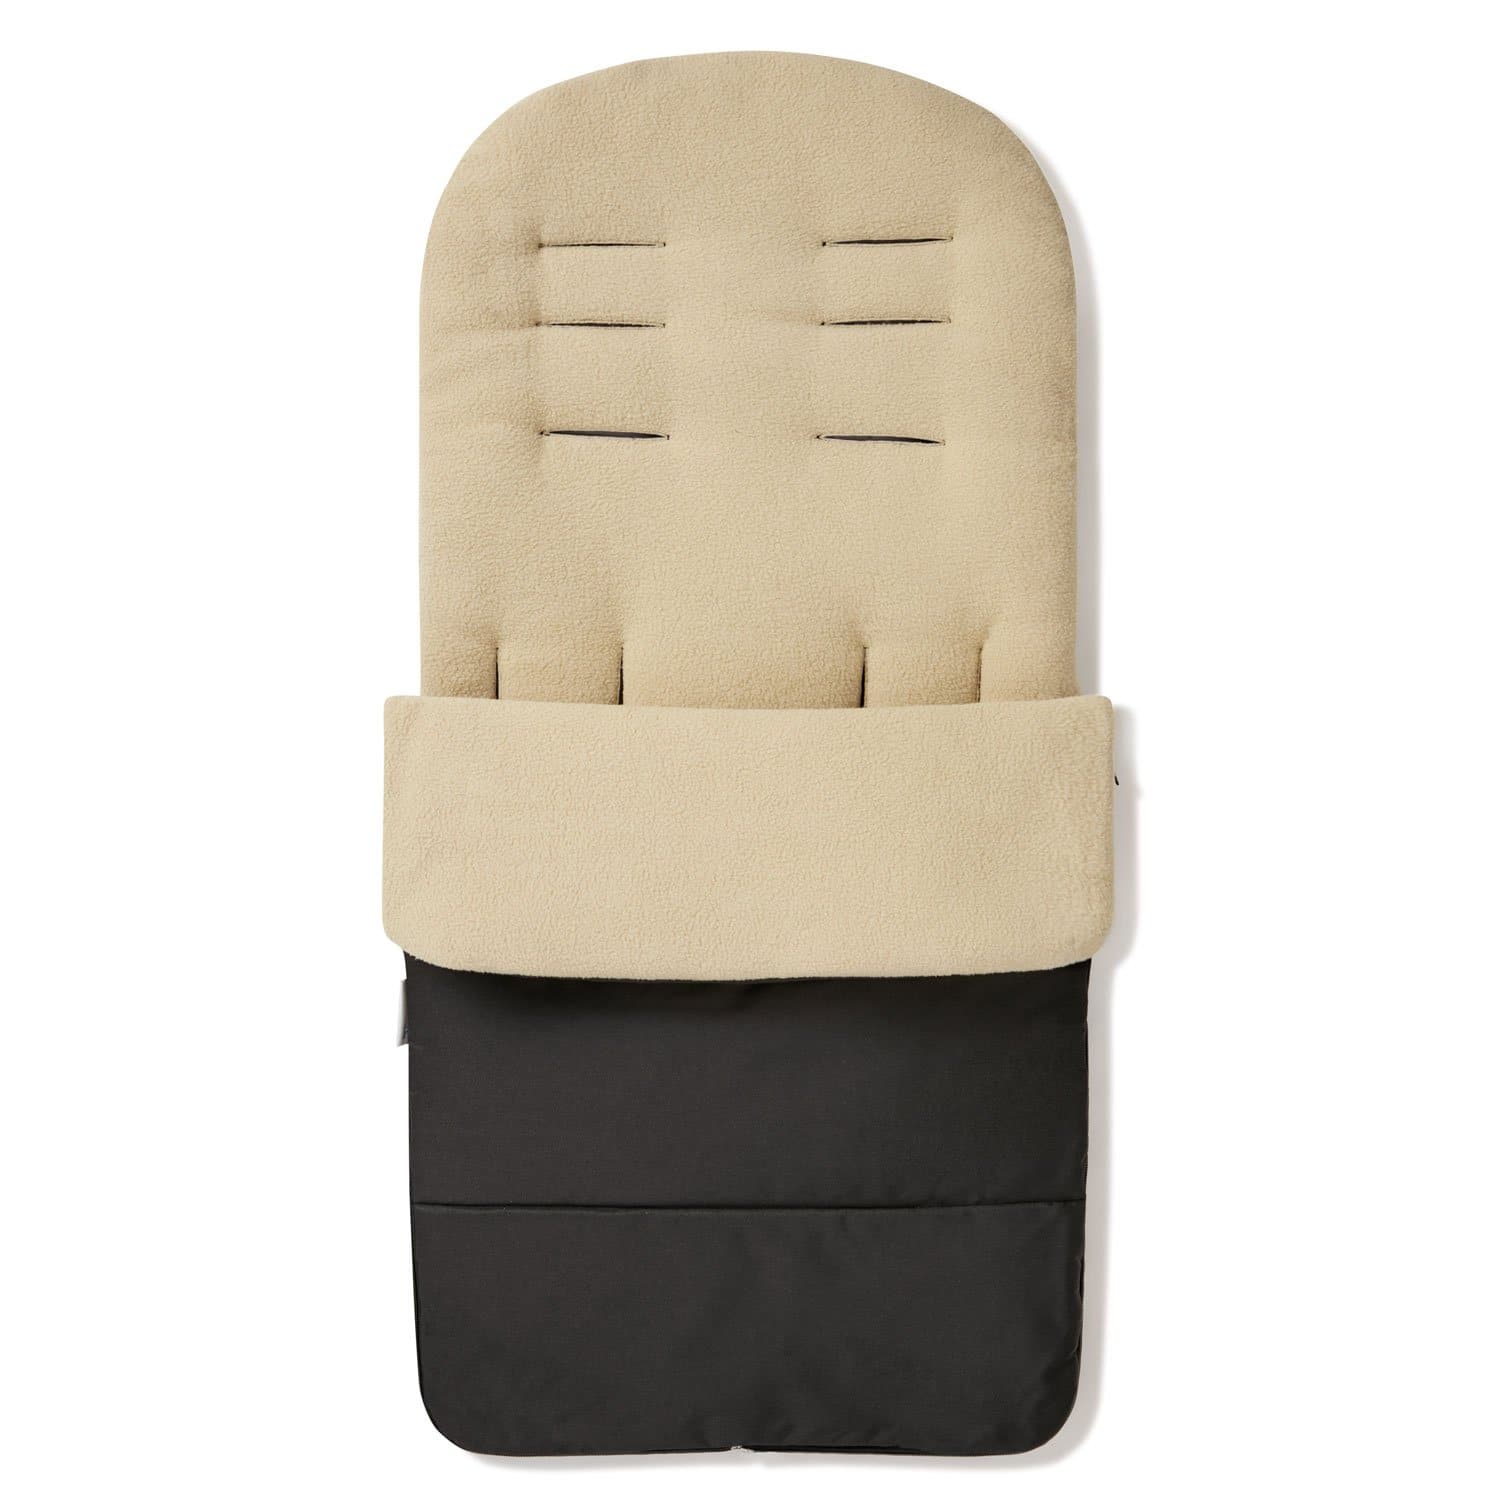 Premium Footmuff / Cosy Toes Compatible with Phil & Teds - Desert Sand / Fits All Models | For Your Little One